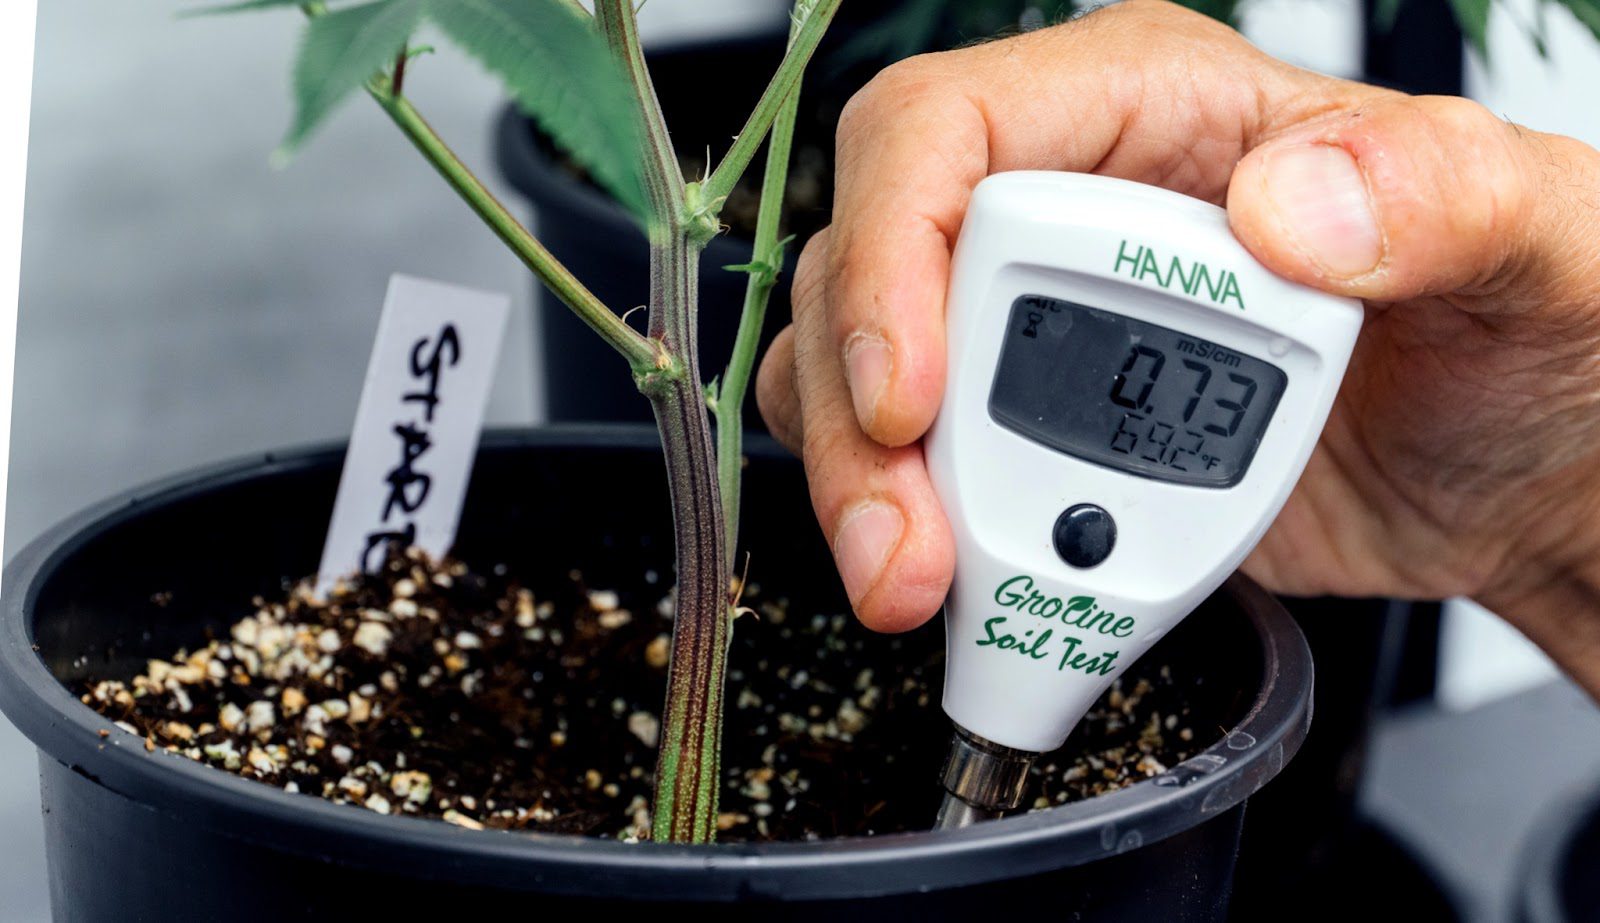 monitoring temperature of a plant